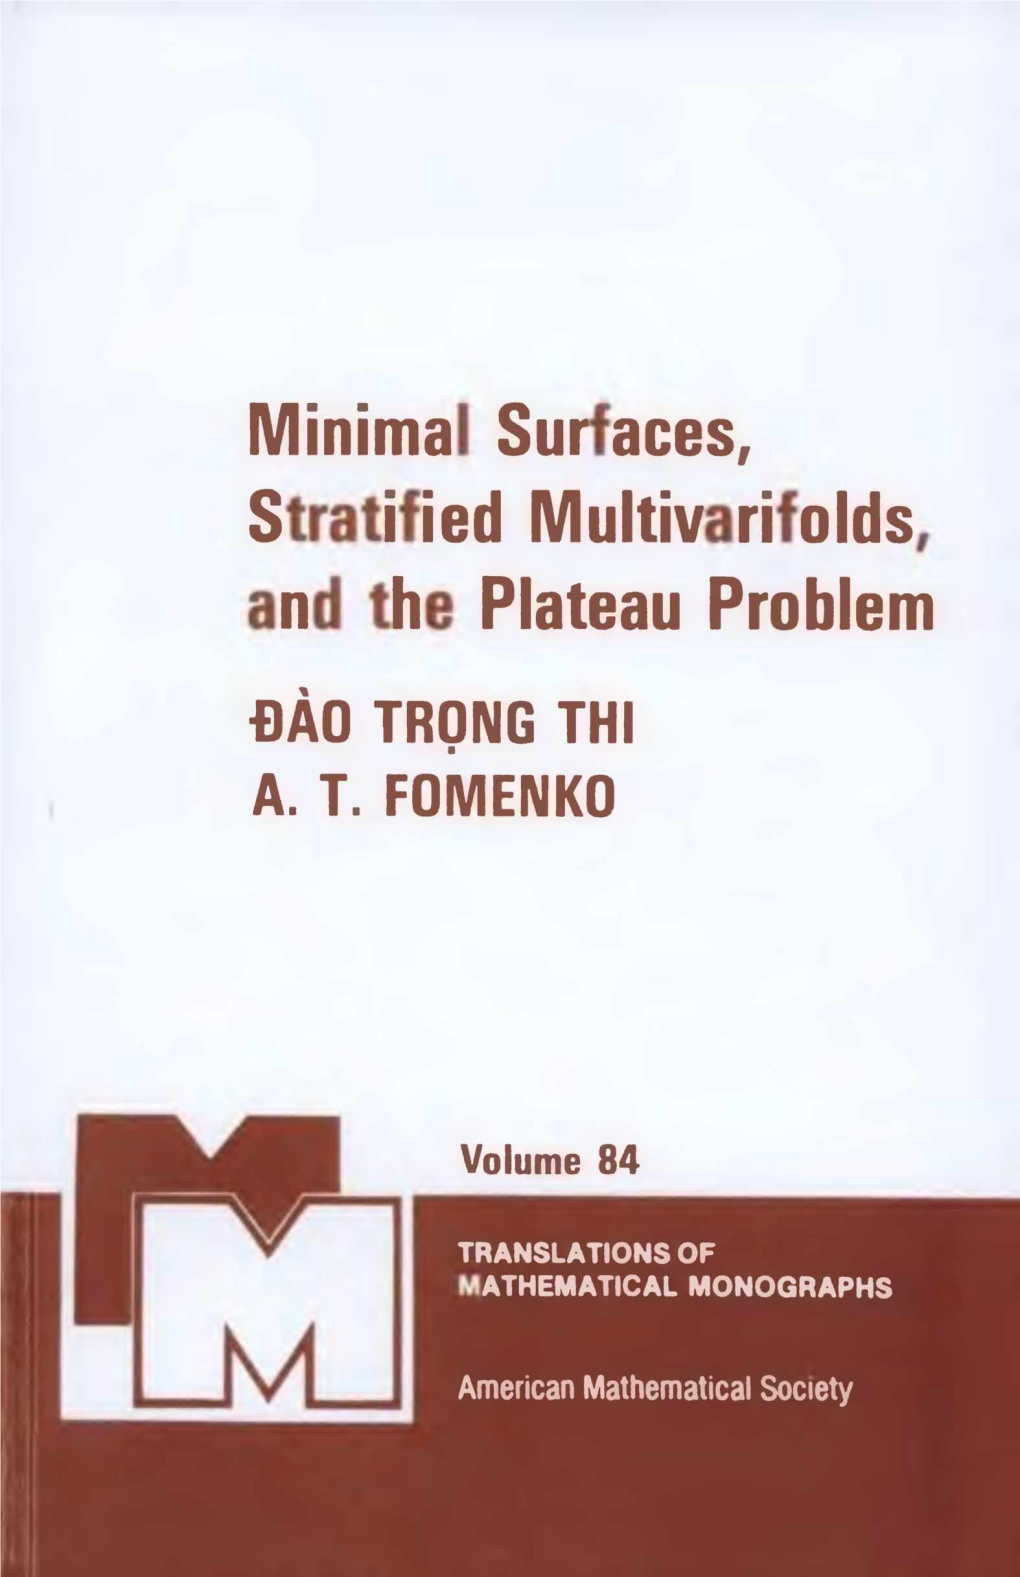 Stratified Multivarifolds, and the Plateau Problem